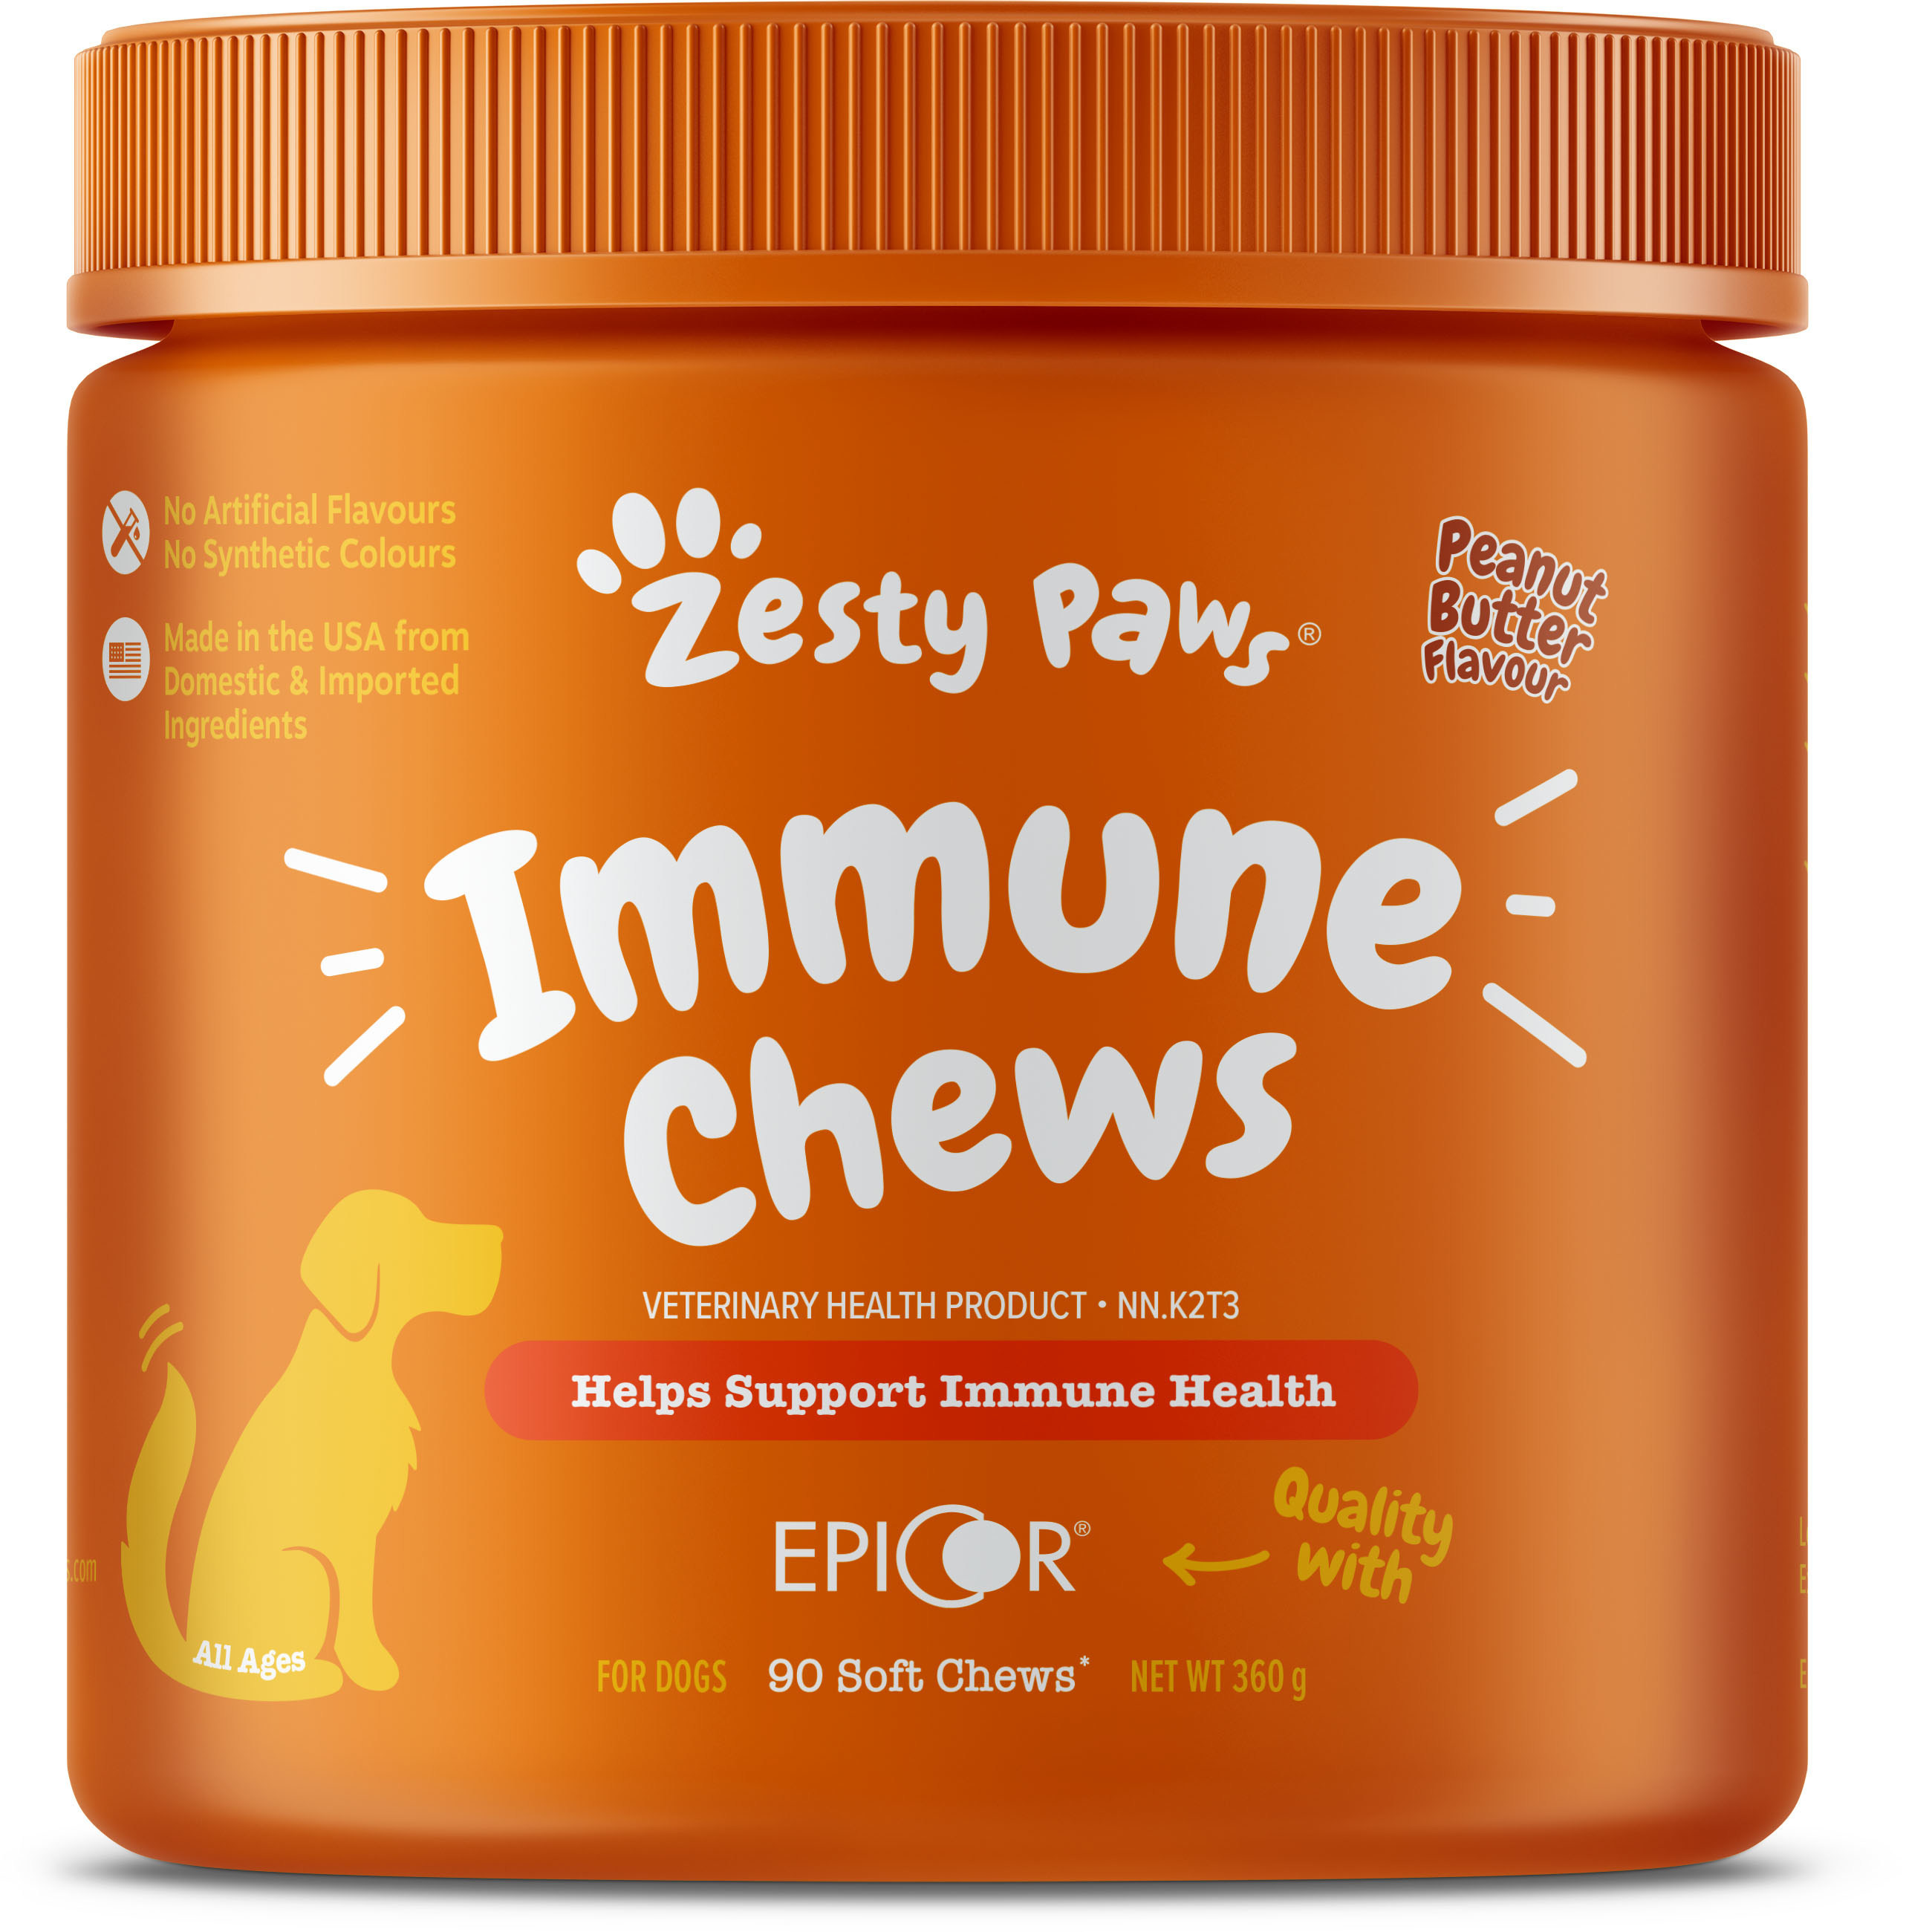 Zesty Paws Launches in Canada in Partnership with PetSmart and Amazon